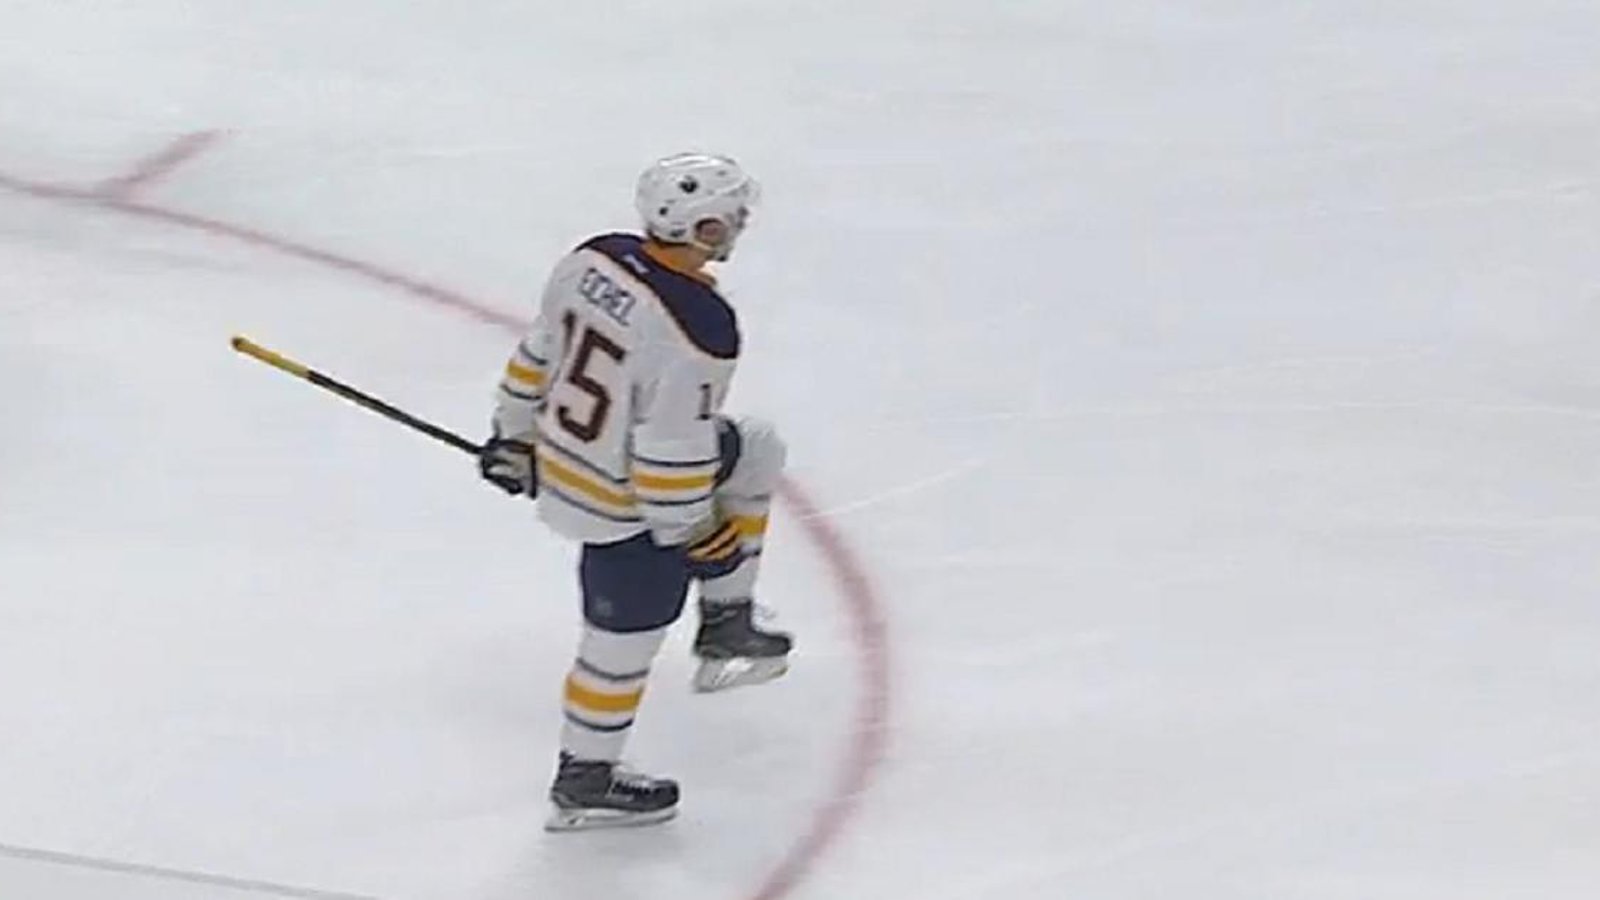 Jack Eichel has a great return to the Sabres lineup